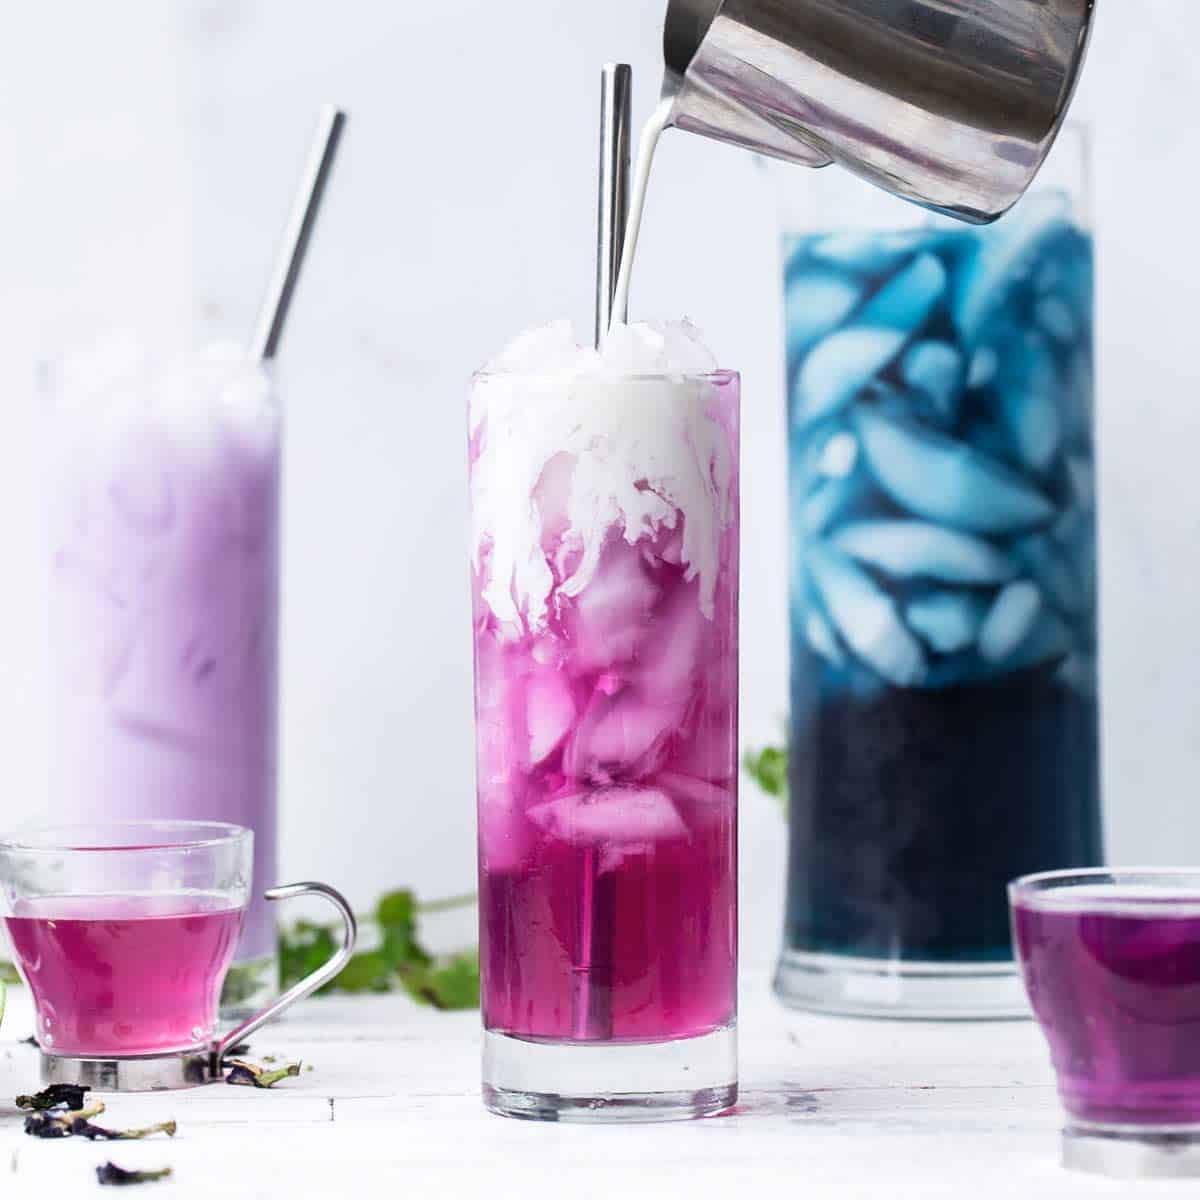 Color changing butterfly pea flower latte in shades of purple, pink and blue with cream drizzling down over the ice of the pink iced tea in front.